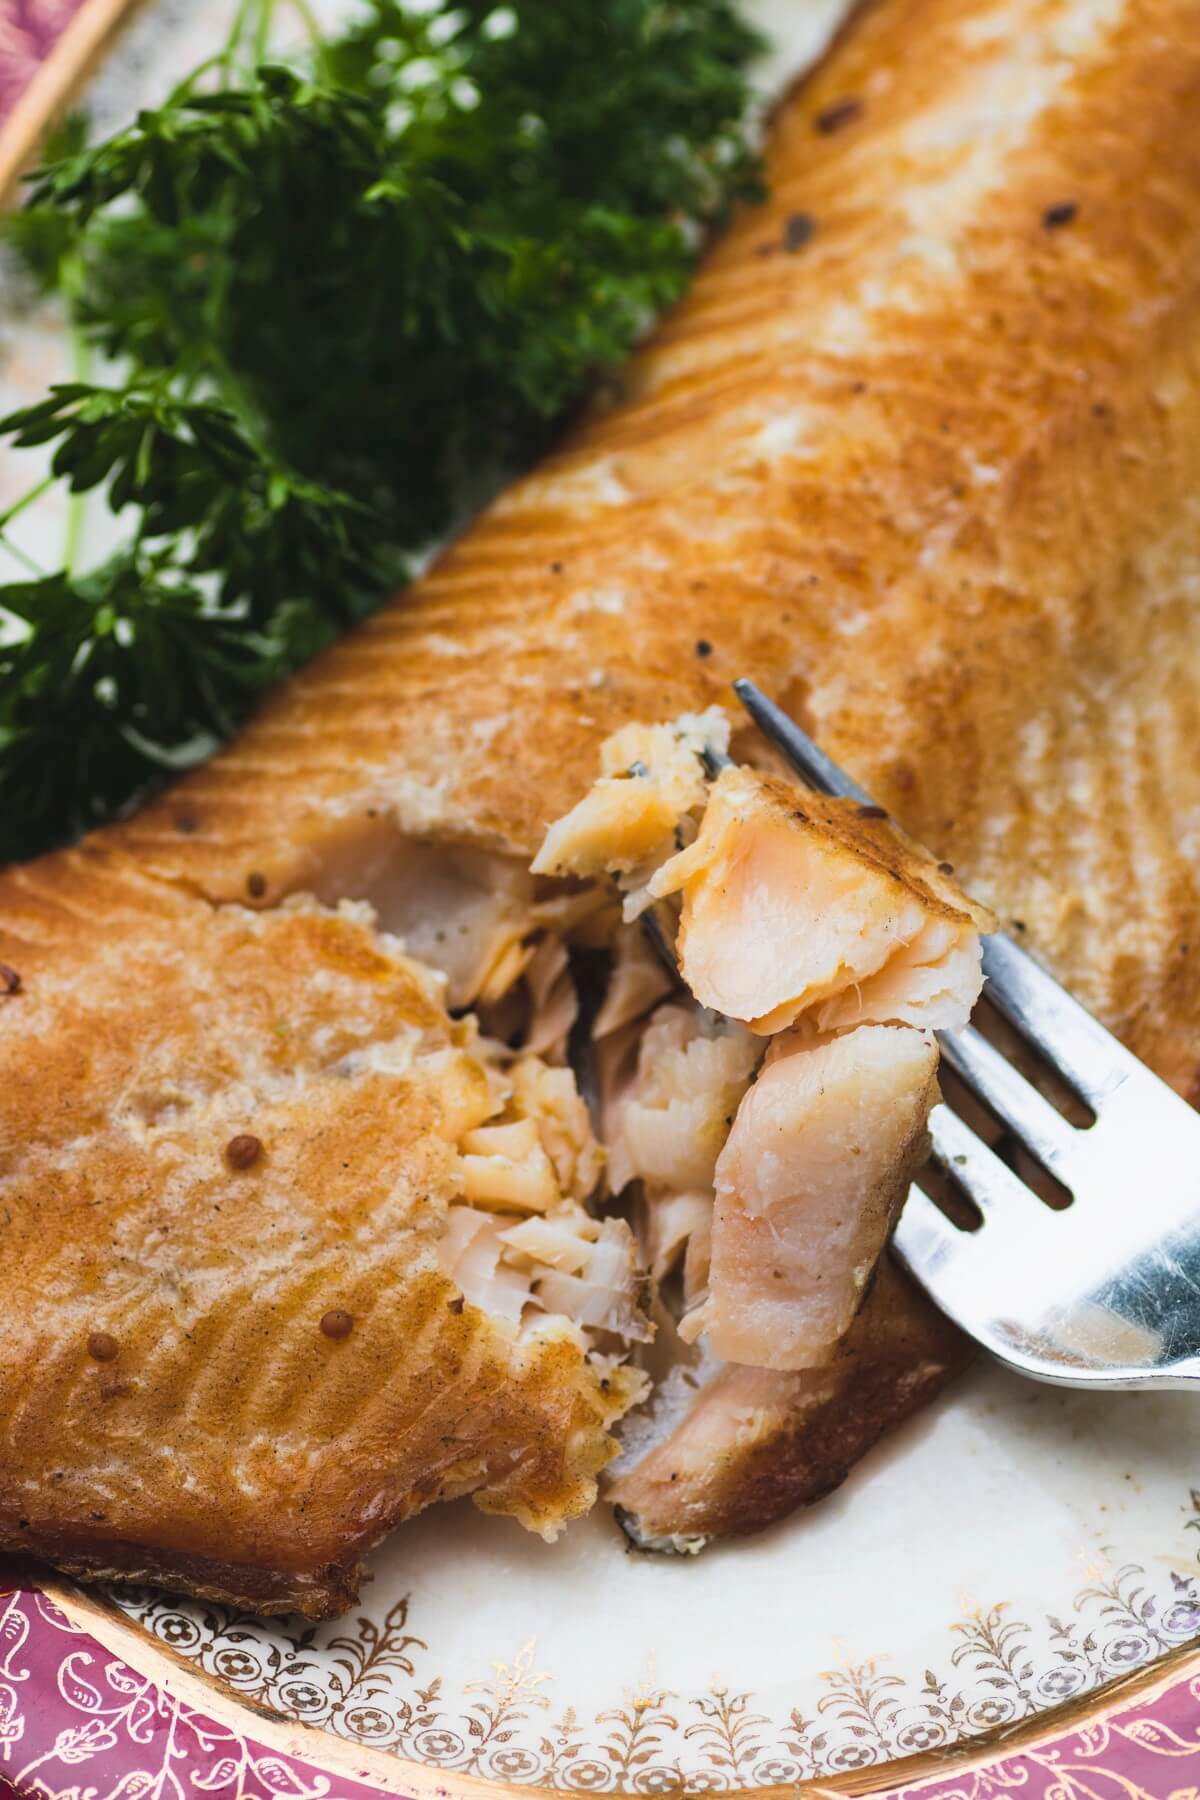 A fork holding a bite of juicy smoked trout above a whole trout filet.